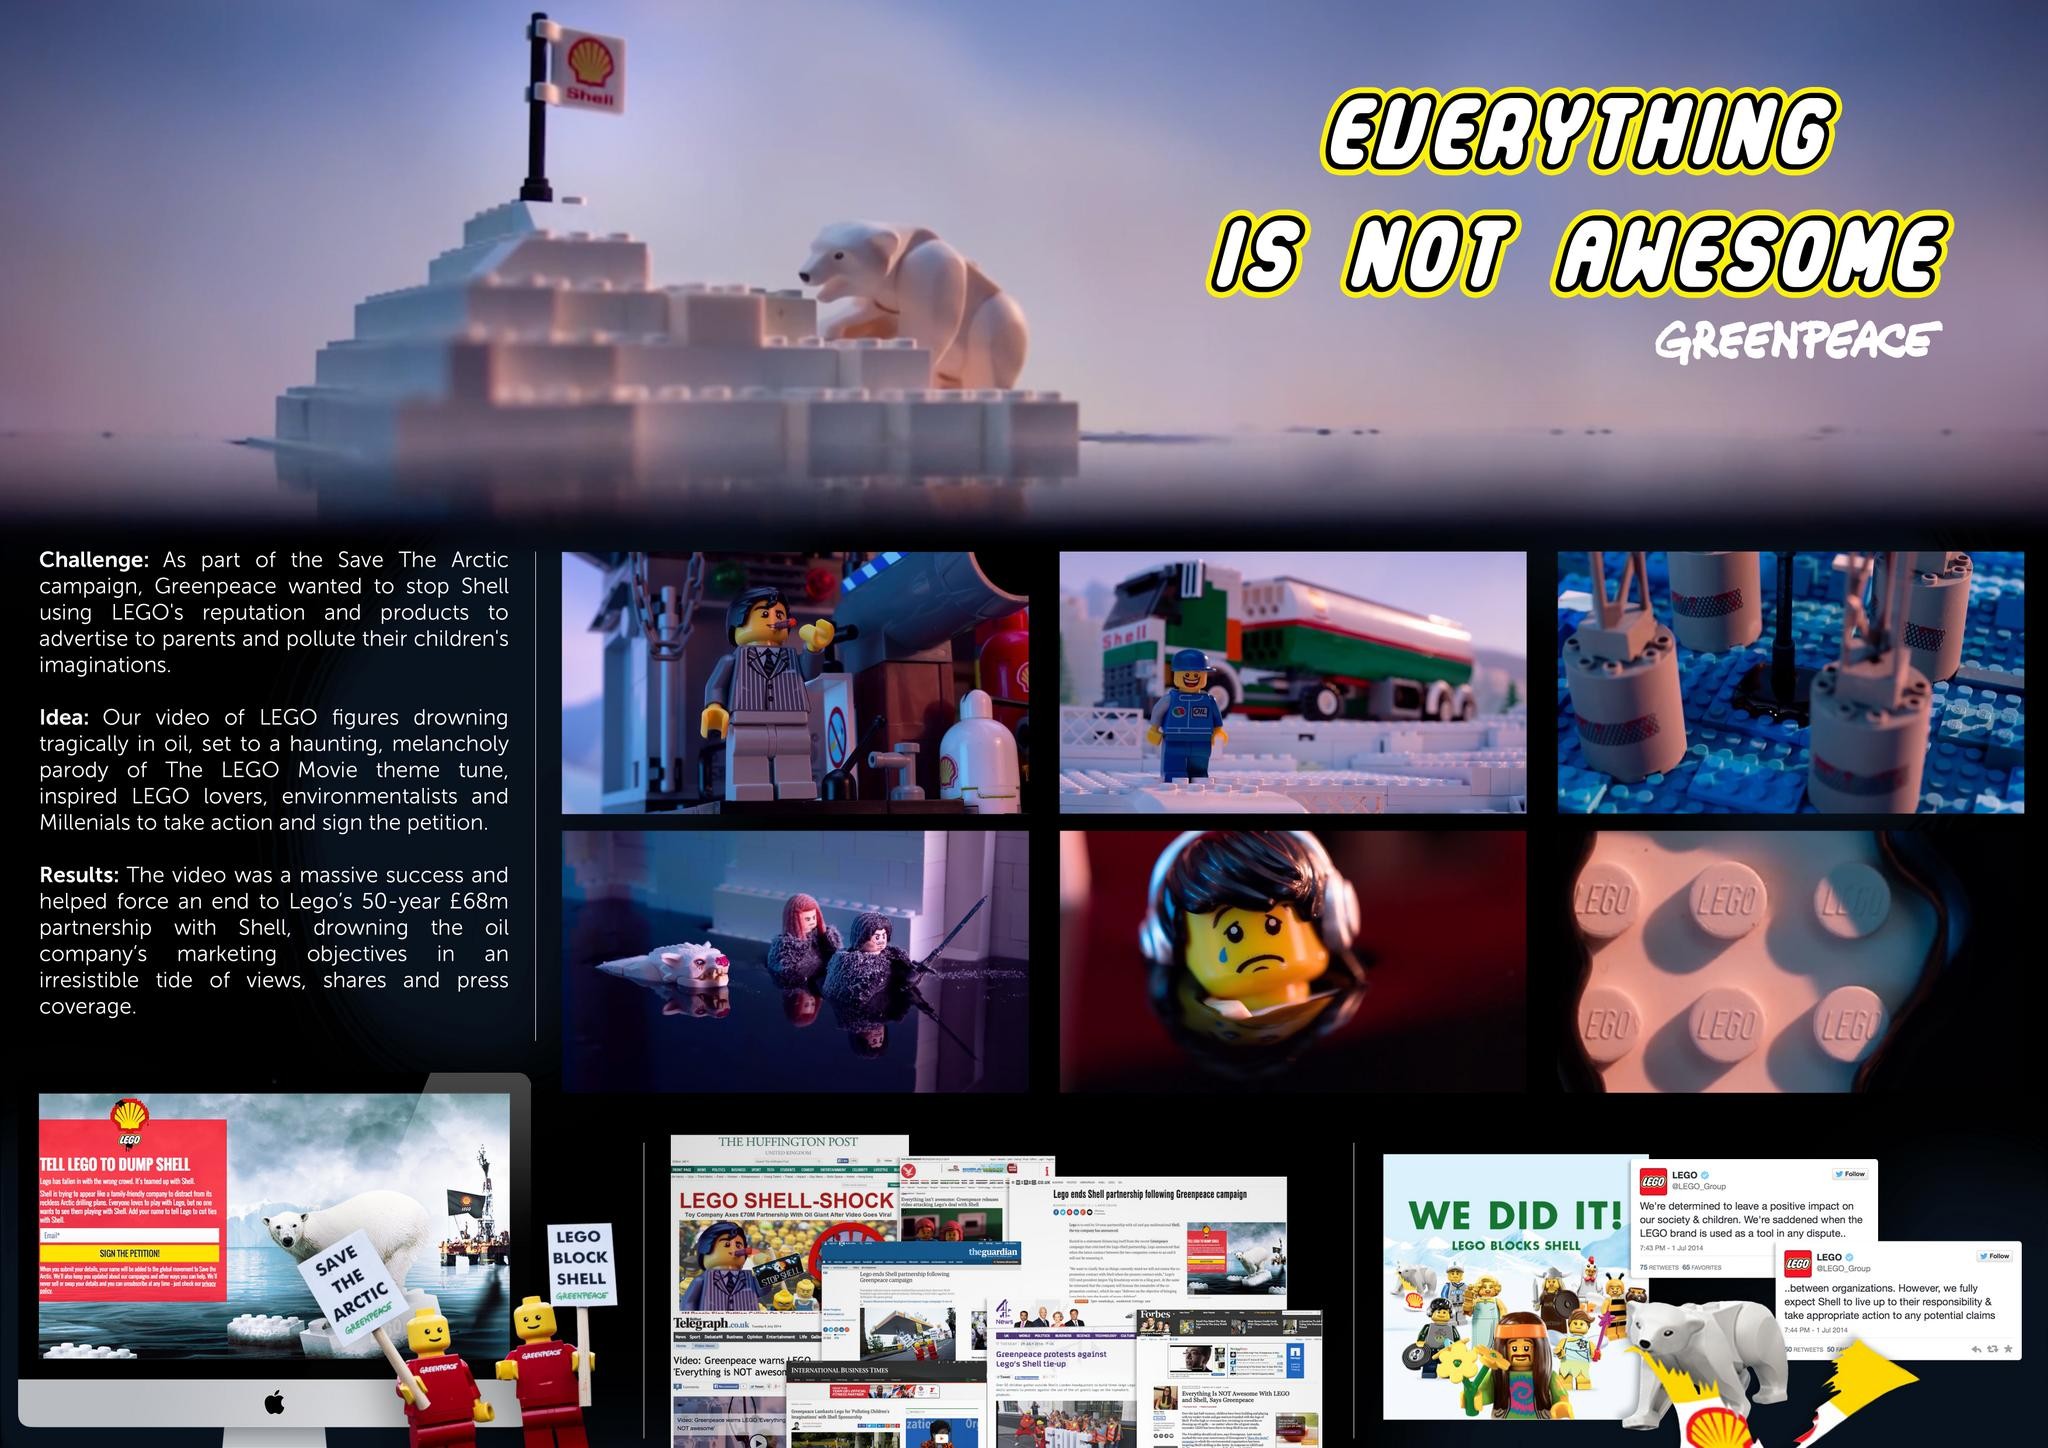 LEGO: EVERYTHING IS NOT AWESOME